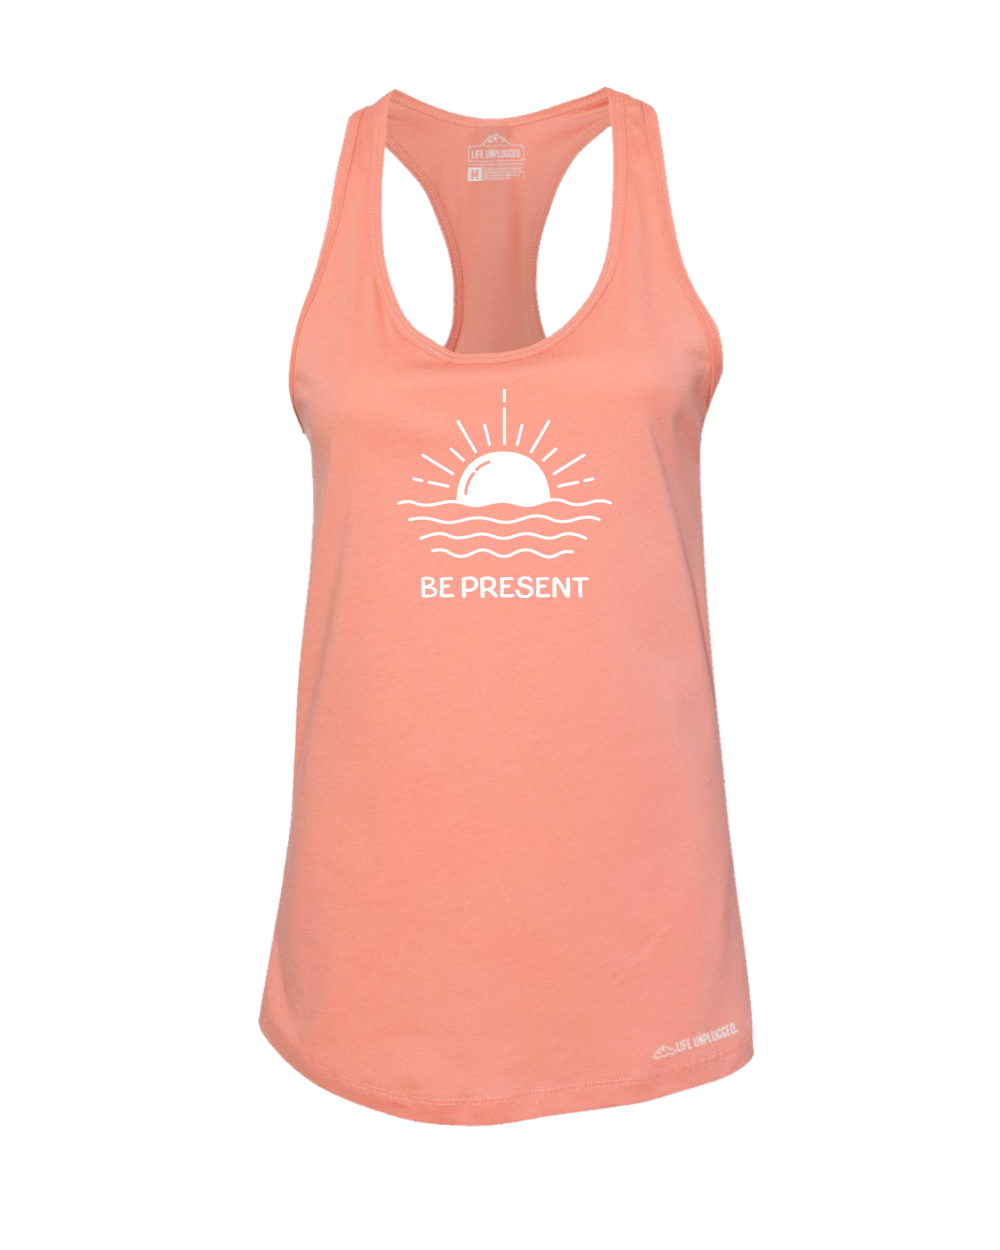 Ocean Sunset Premium Women's Relaxed Fit Racerback Tank Top - Life Unplugged